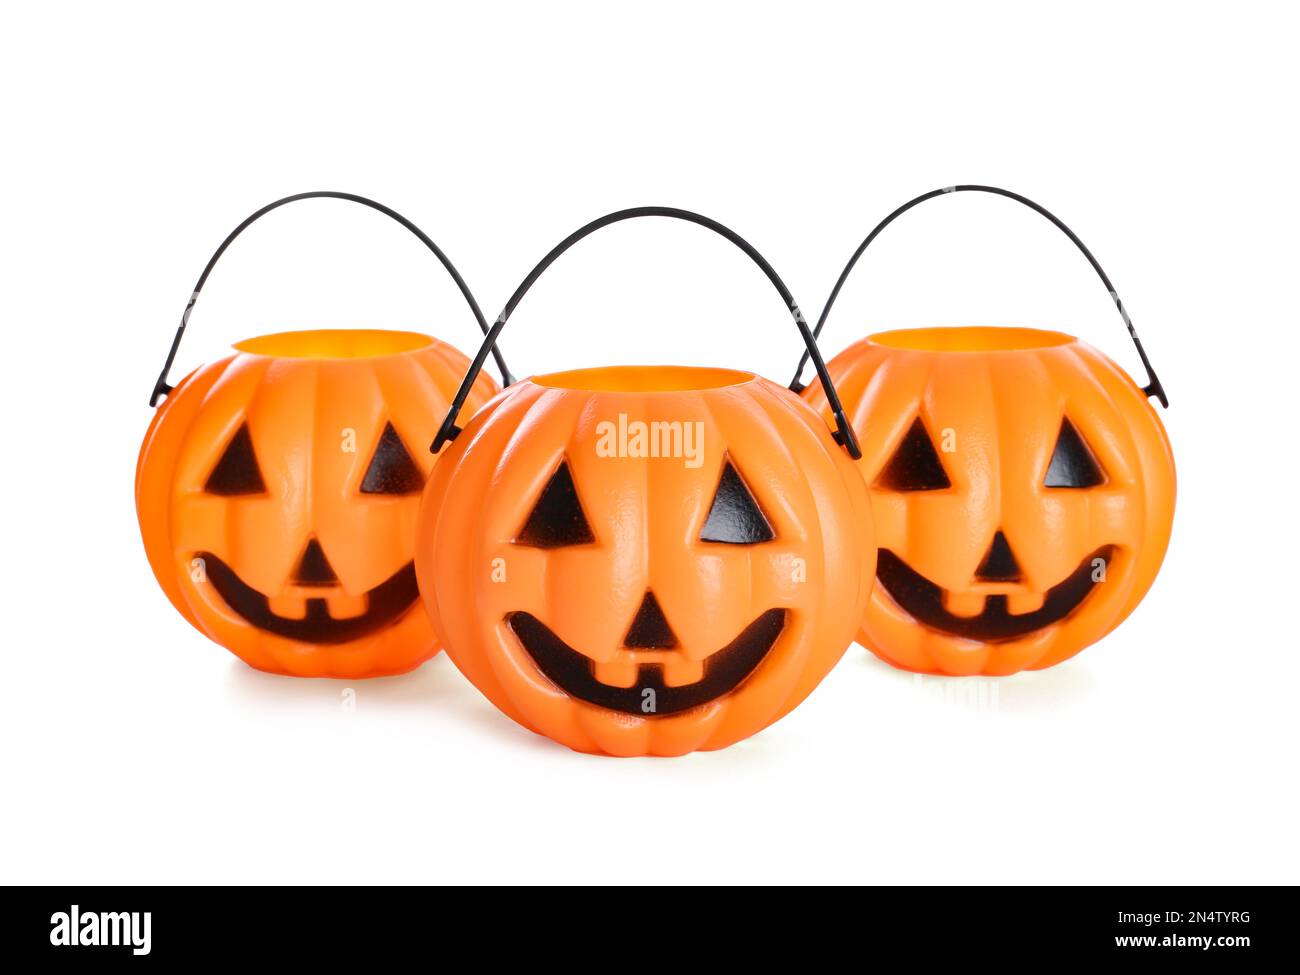 Pumpkin buckets Cut Out Stock Images & Pictures - Alamy